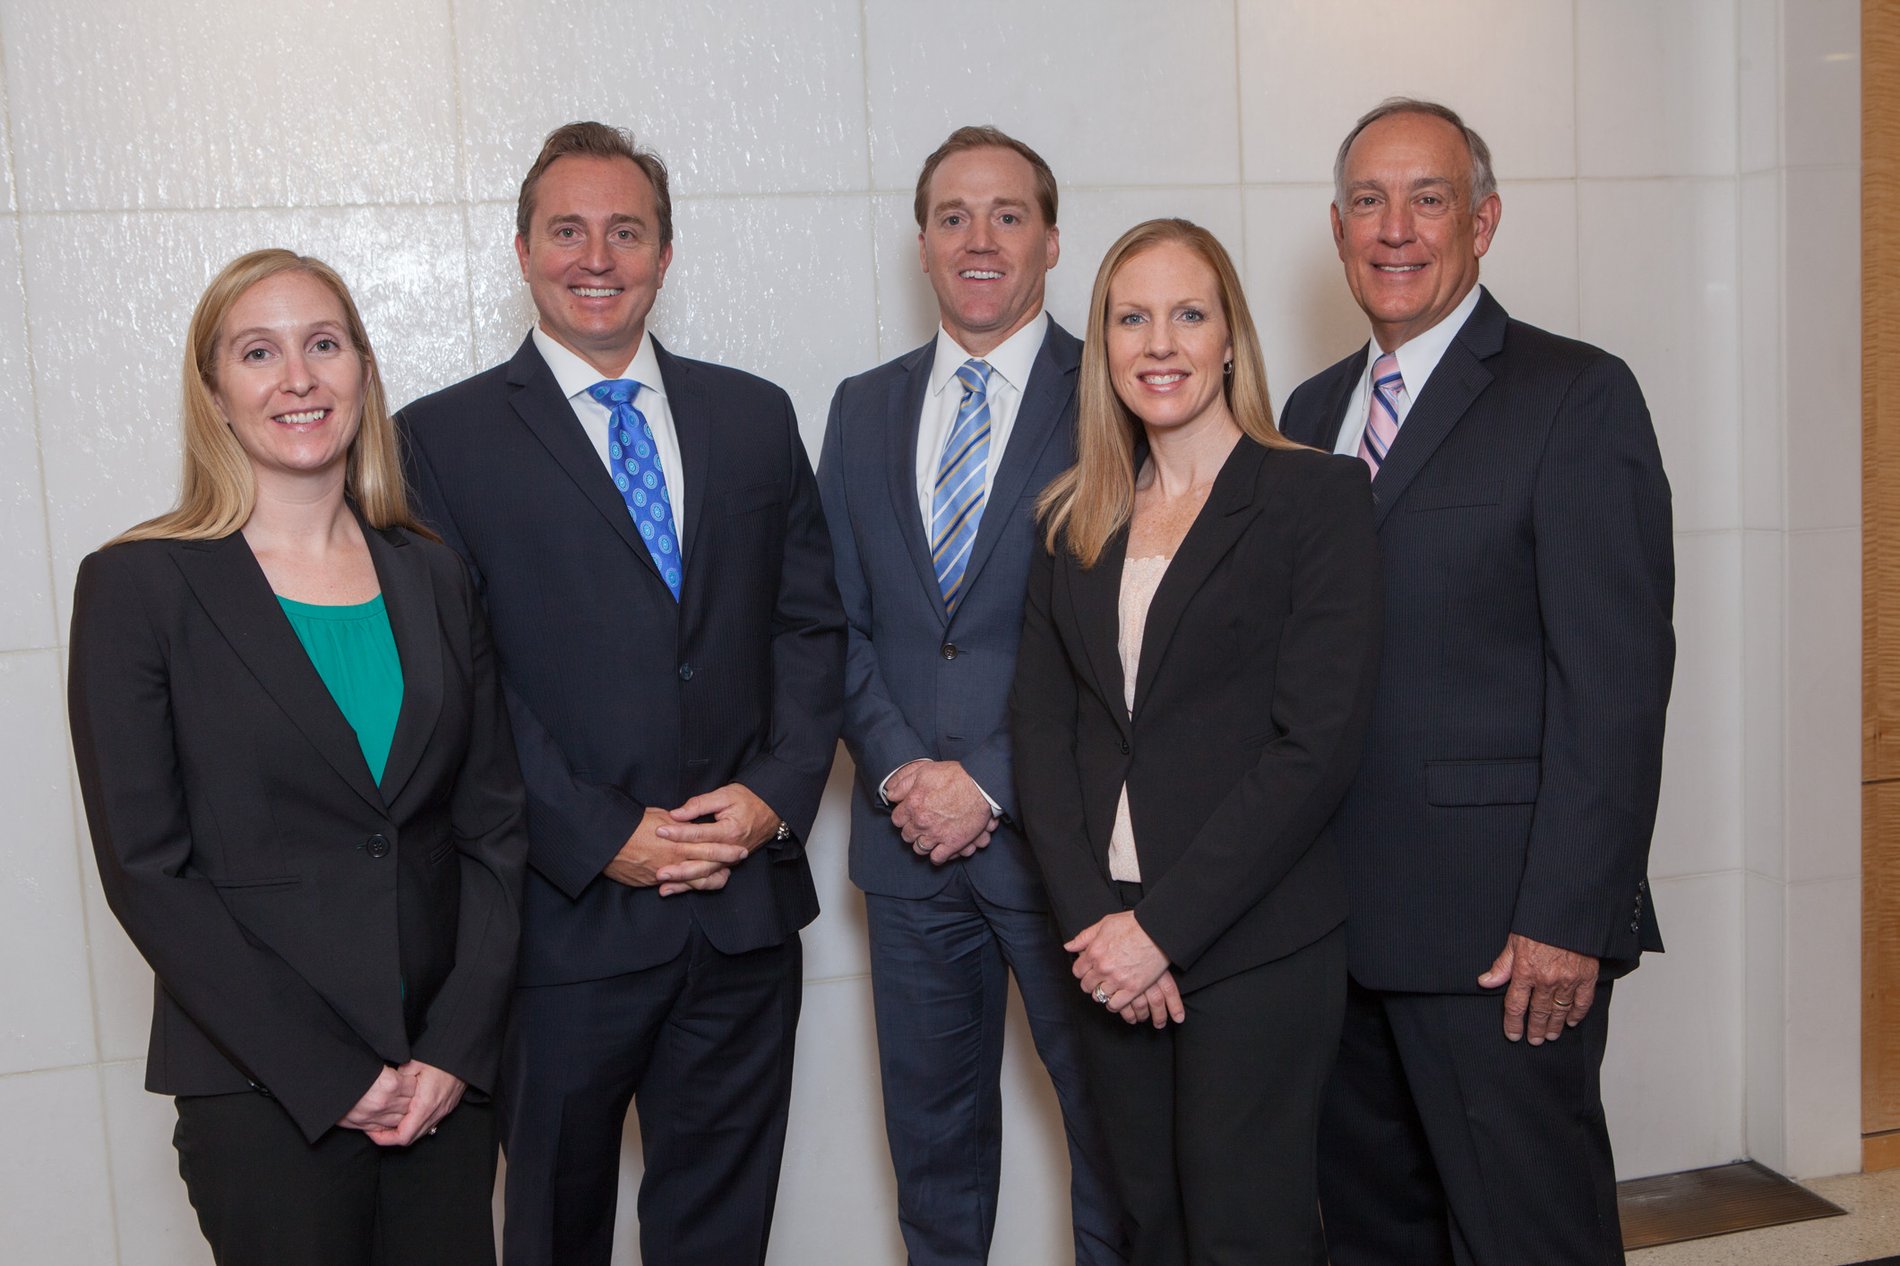 The NewBridge Group of St. Louis | Chesterfield, MO | Morgan Stanley Wealth Management